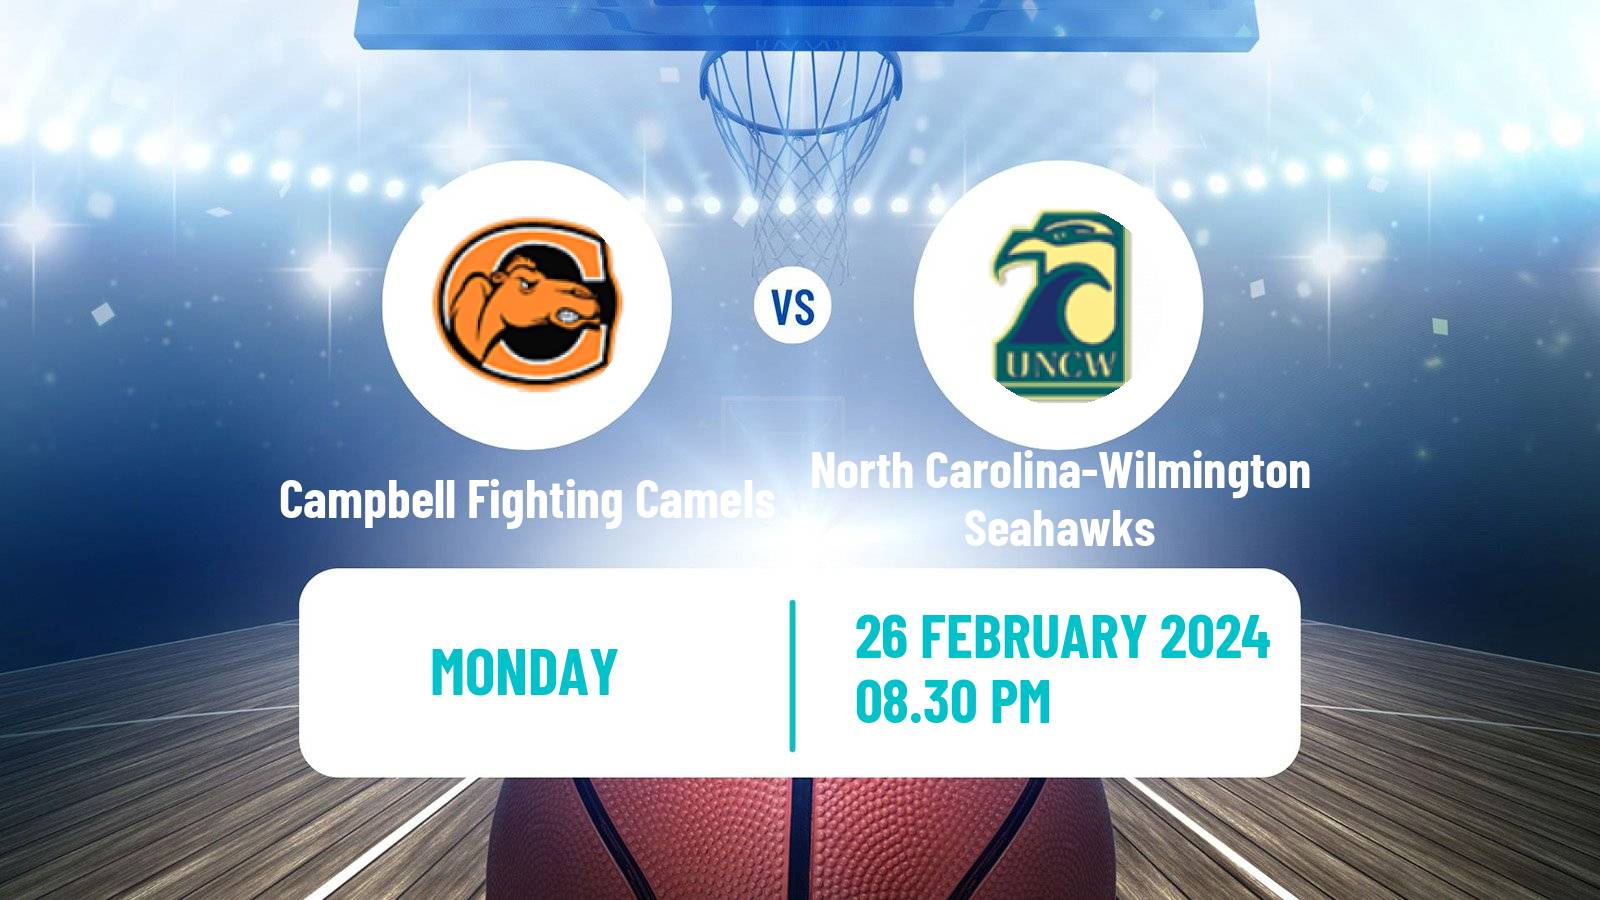 Basketball NCAA College Basketball Campbell Fighting Camels - North Carolina-Wilmington Seahawks